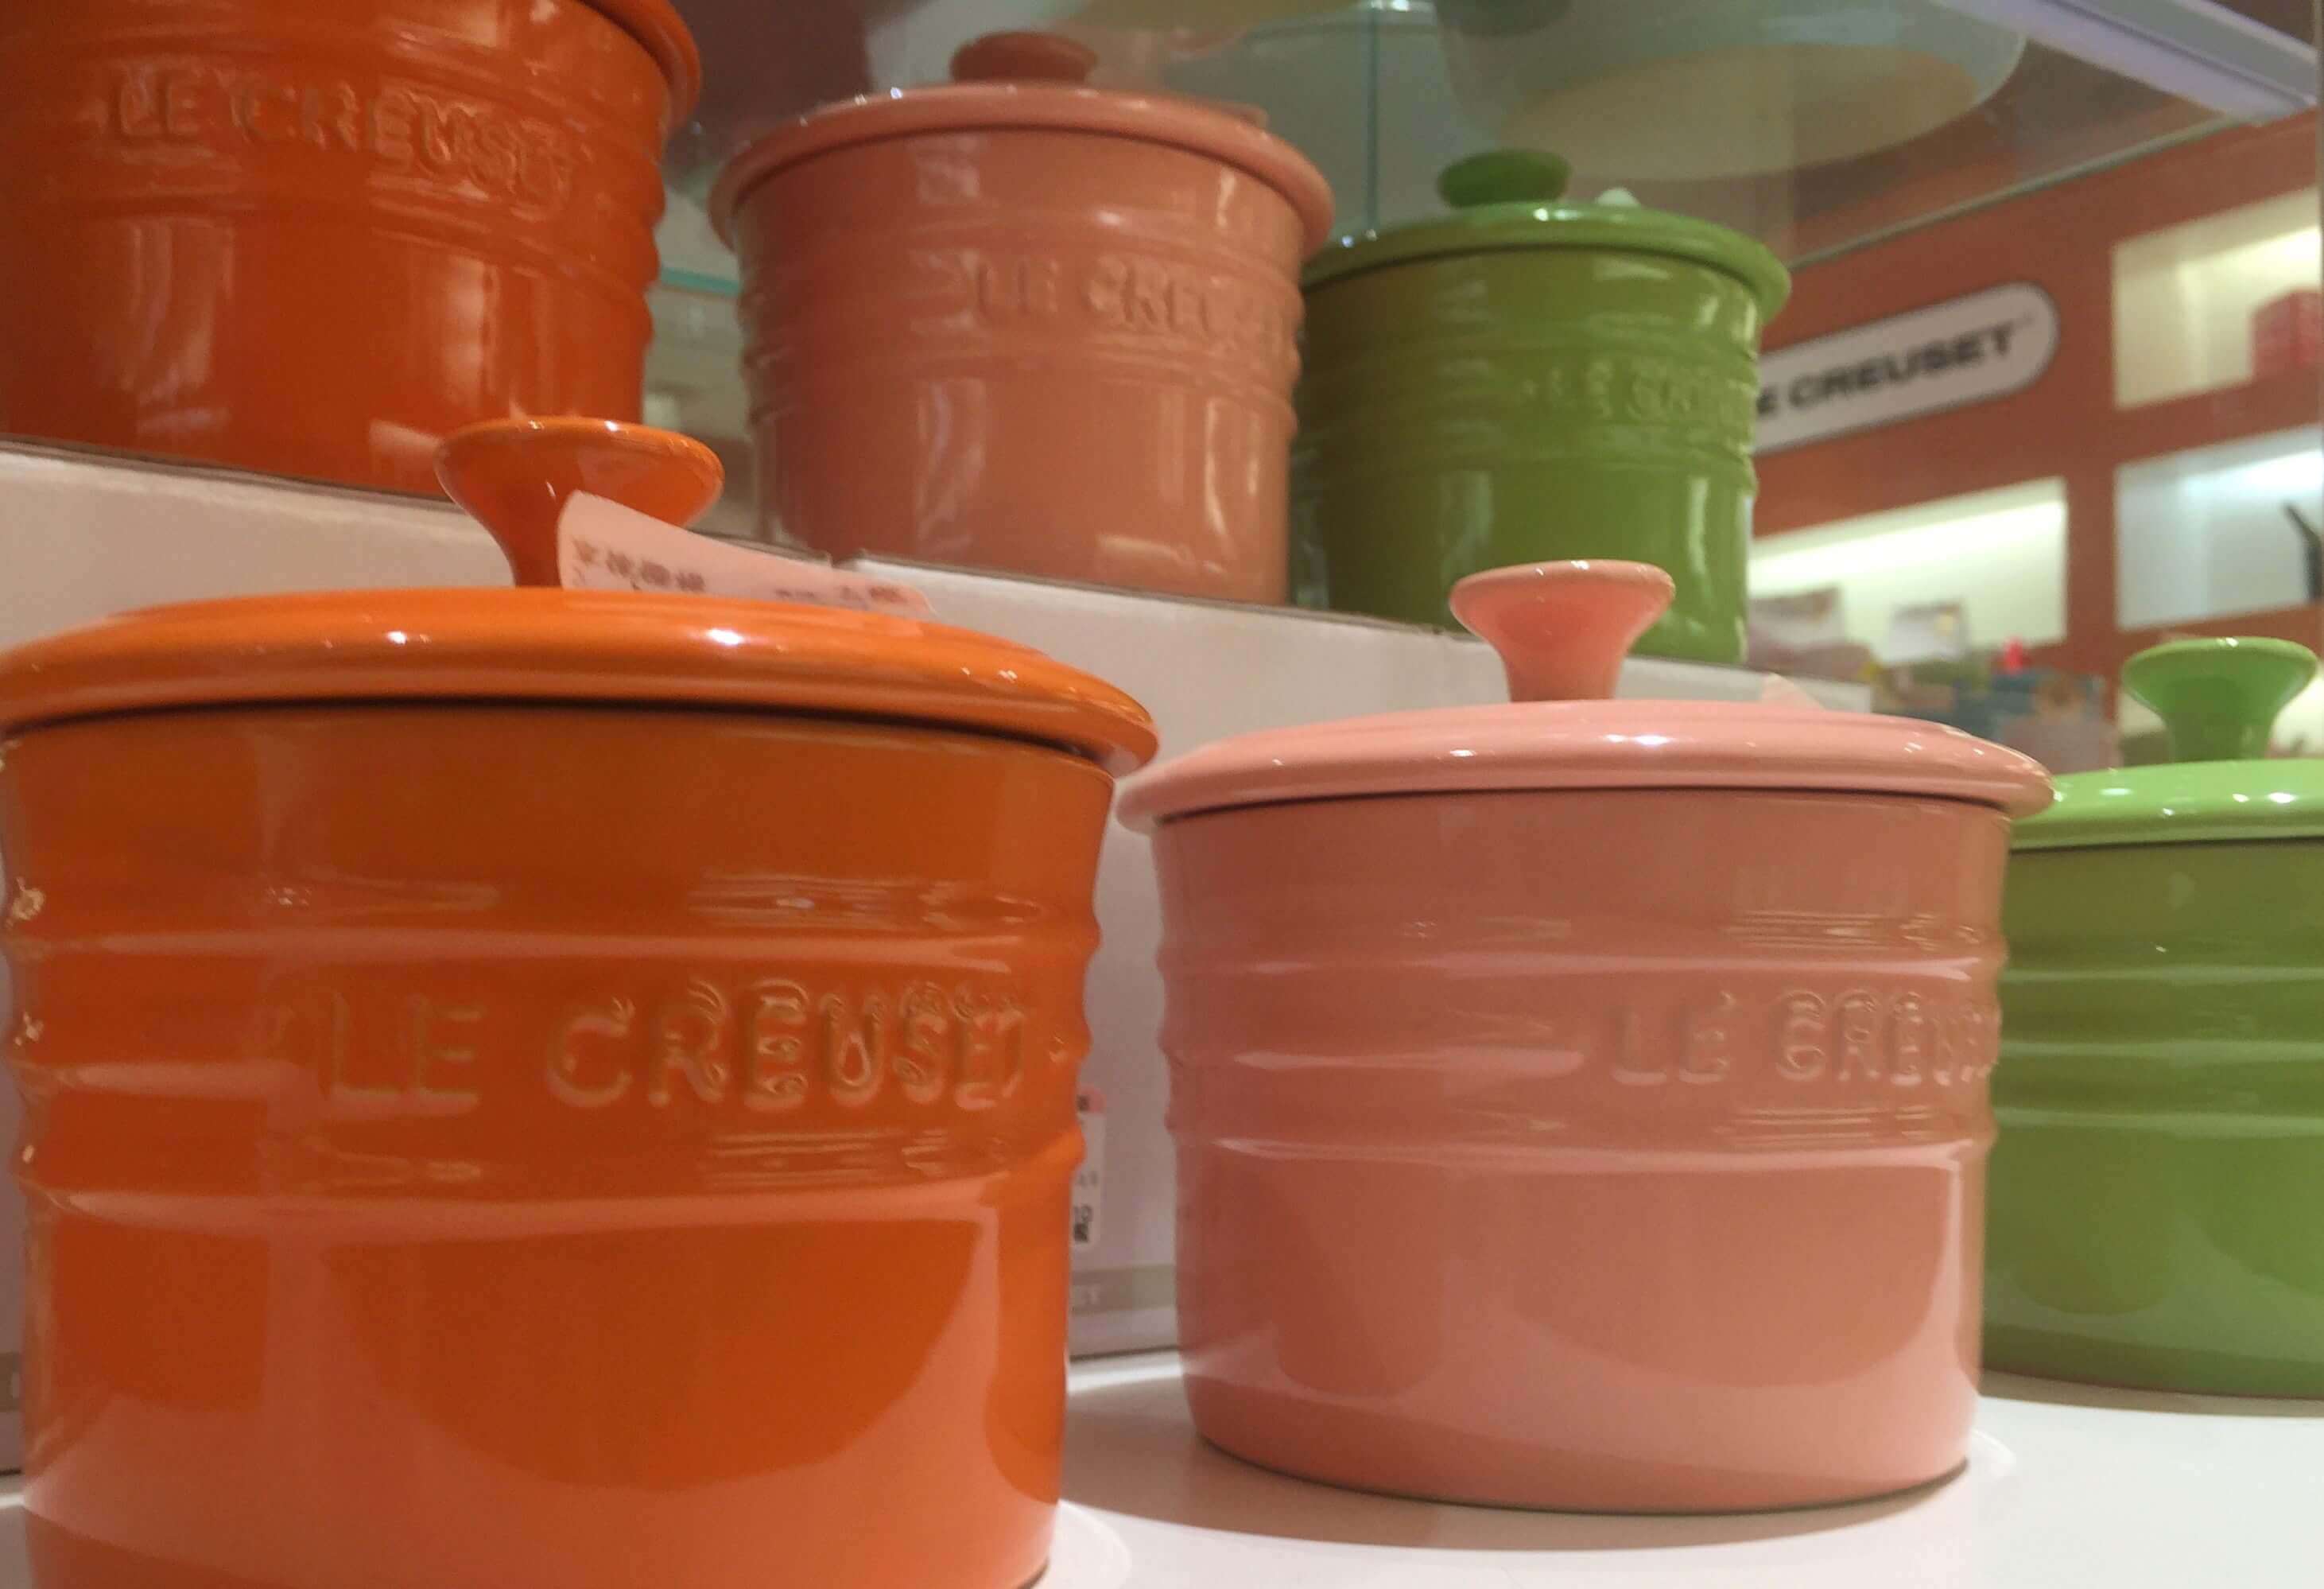 What are the benefits of ceramic cookware? Let's find out.